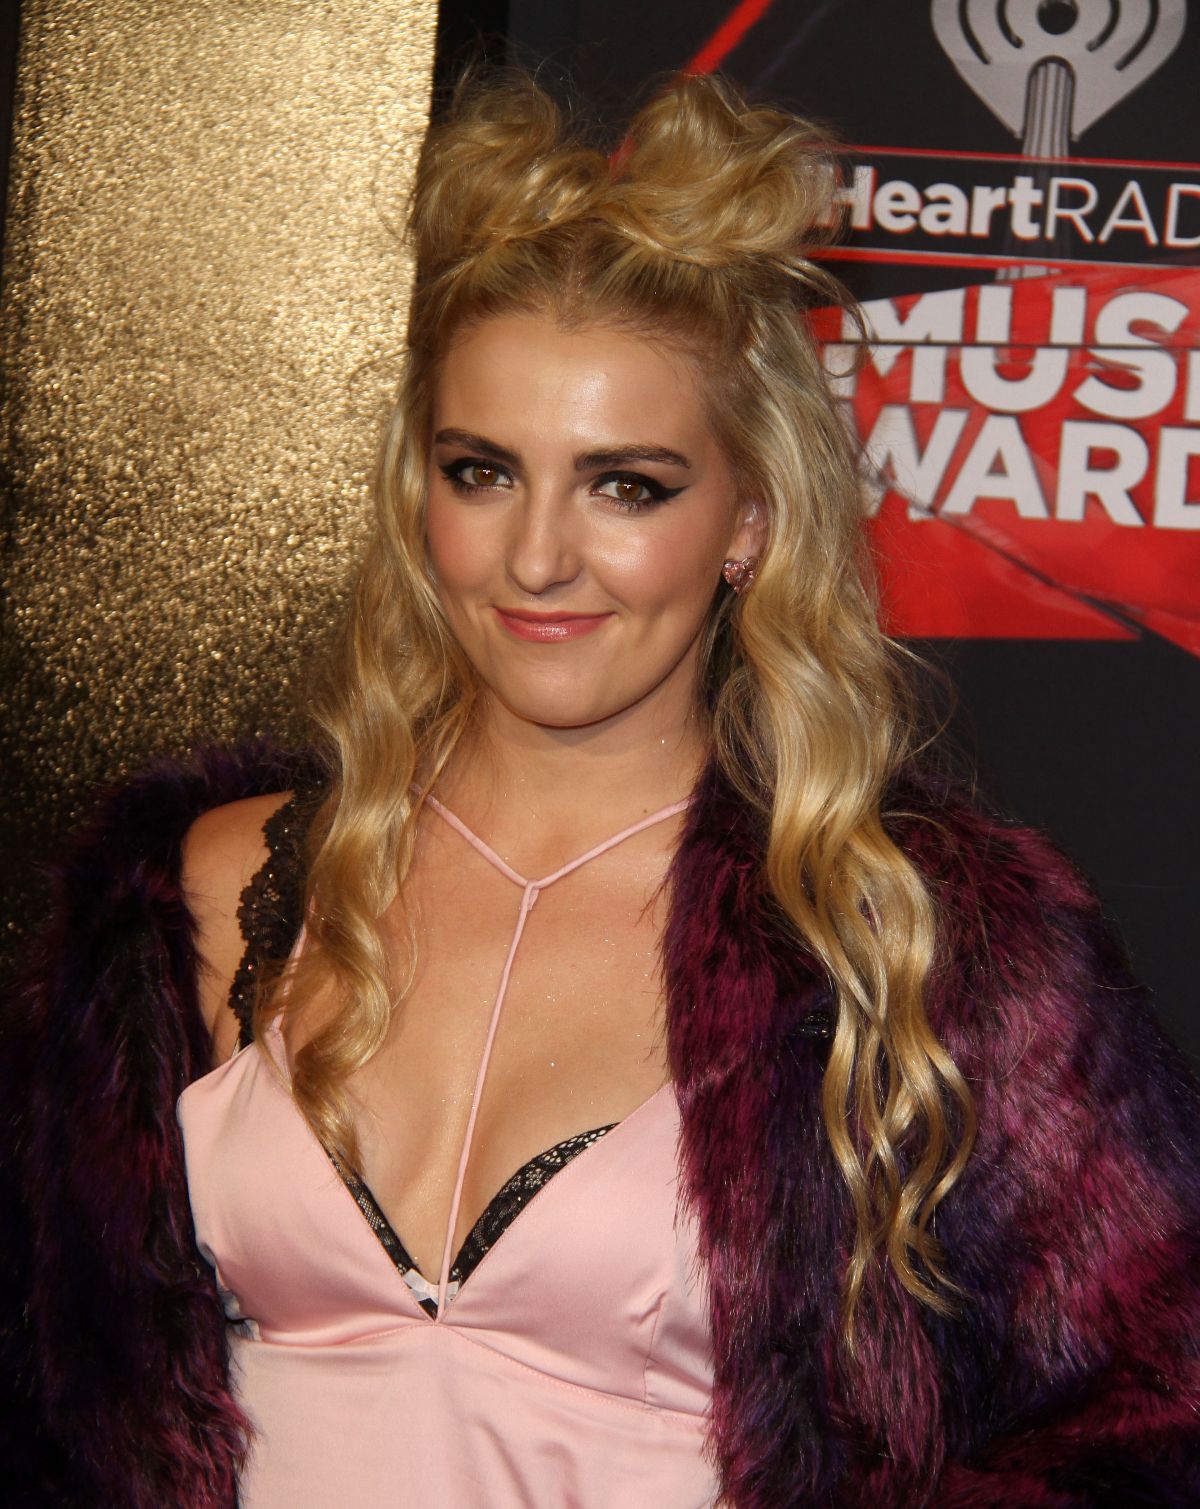 RYDEL LYNCH at 2017 iHeartRadio Music Awards in Los Angeles 03/05/2017